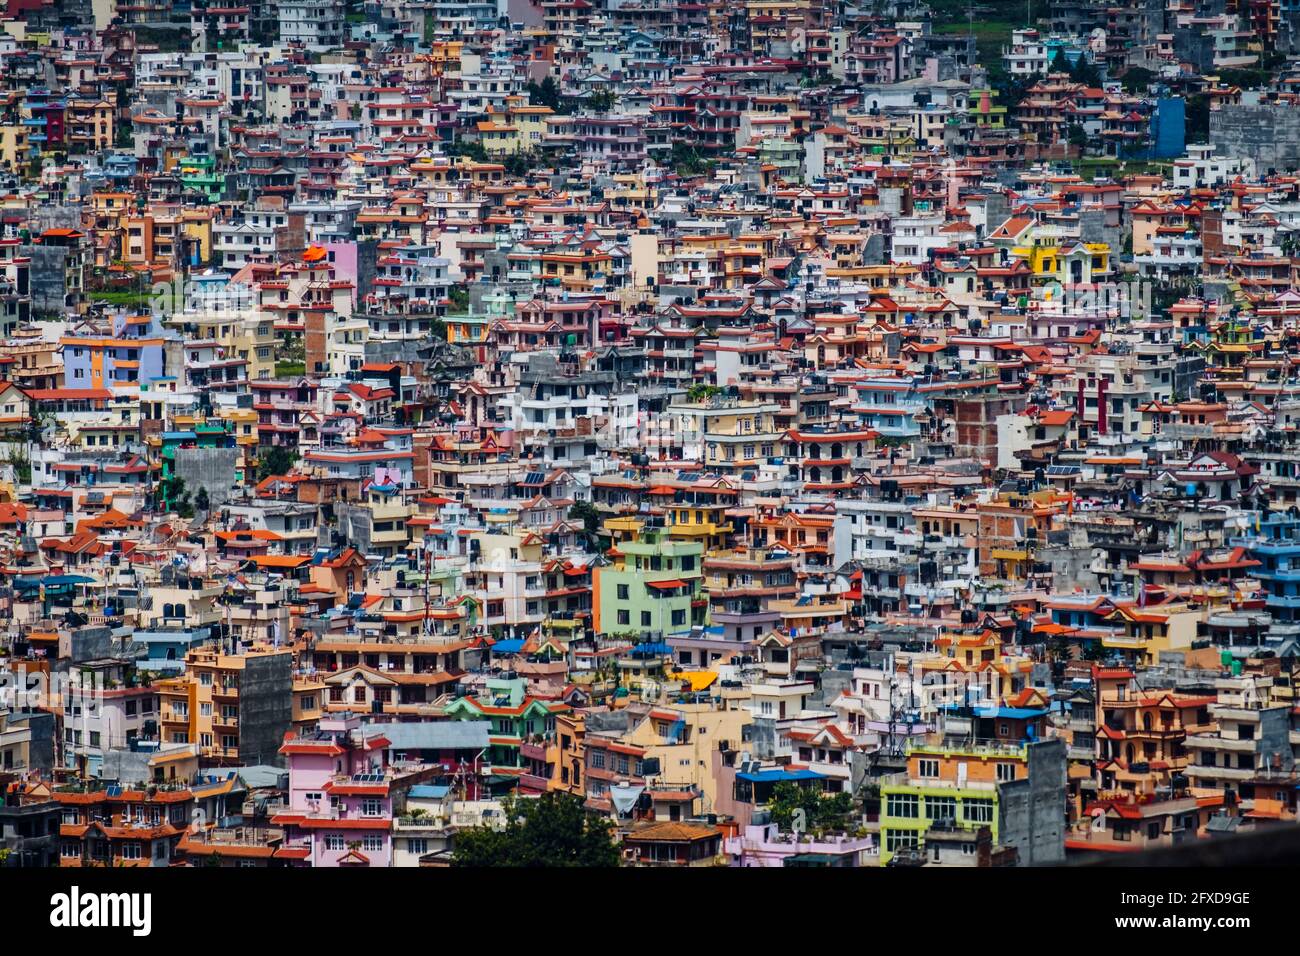 Kathmandu’s cityscape featuring colourful colourful houses in Nepal Stock Photo